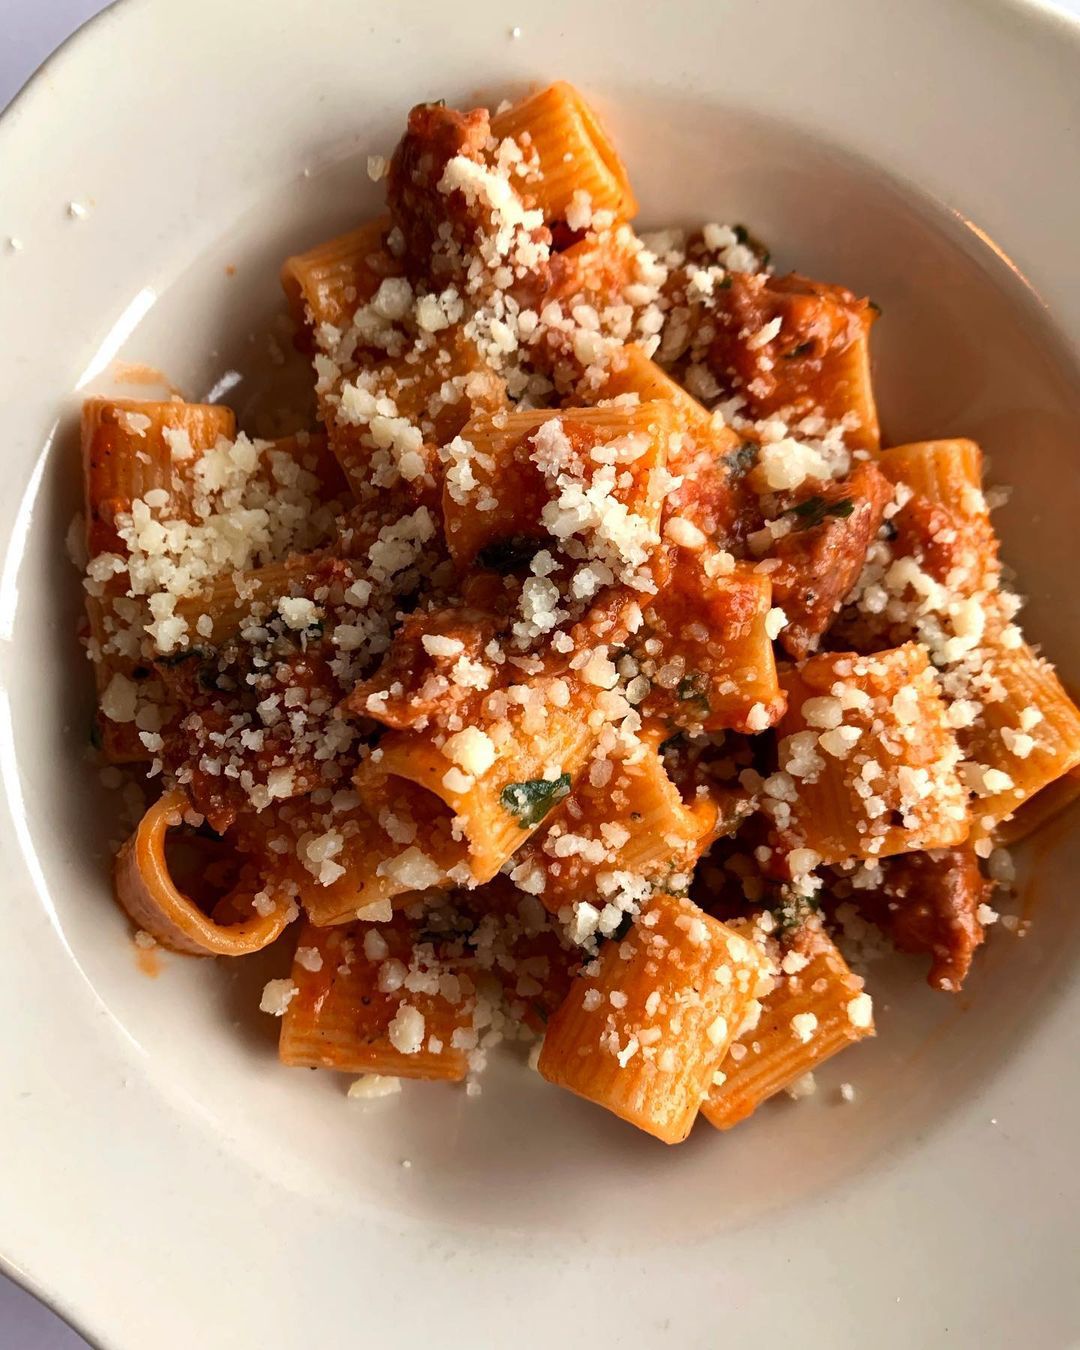 A close up on a small bowl of round, short tubes of pasta in a dark, rustic tomato sauce, and covered with crumbles of parmesan